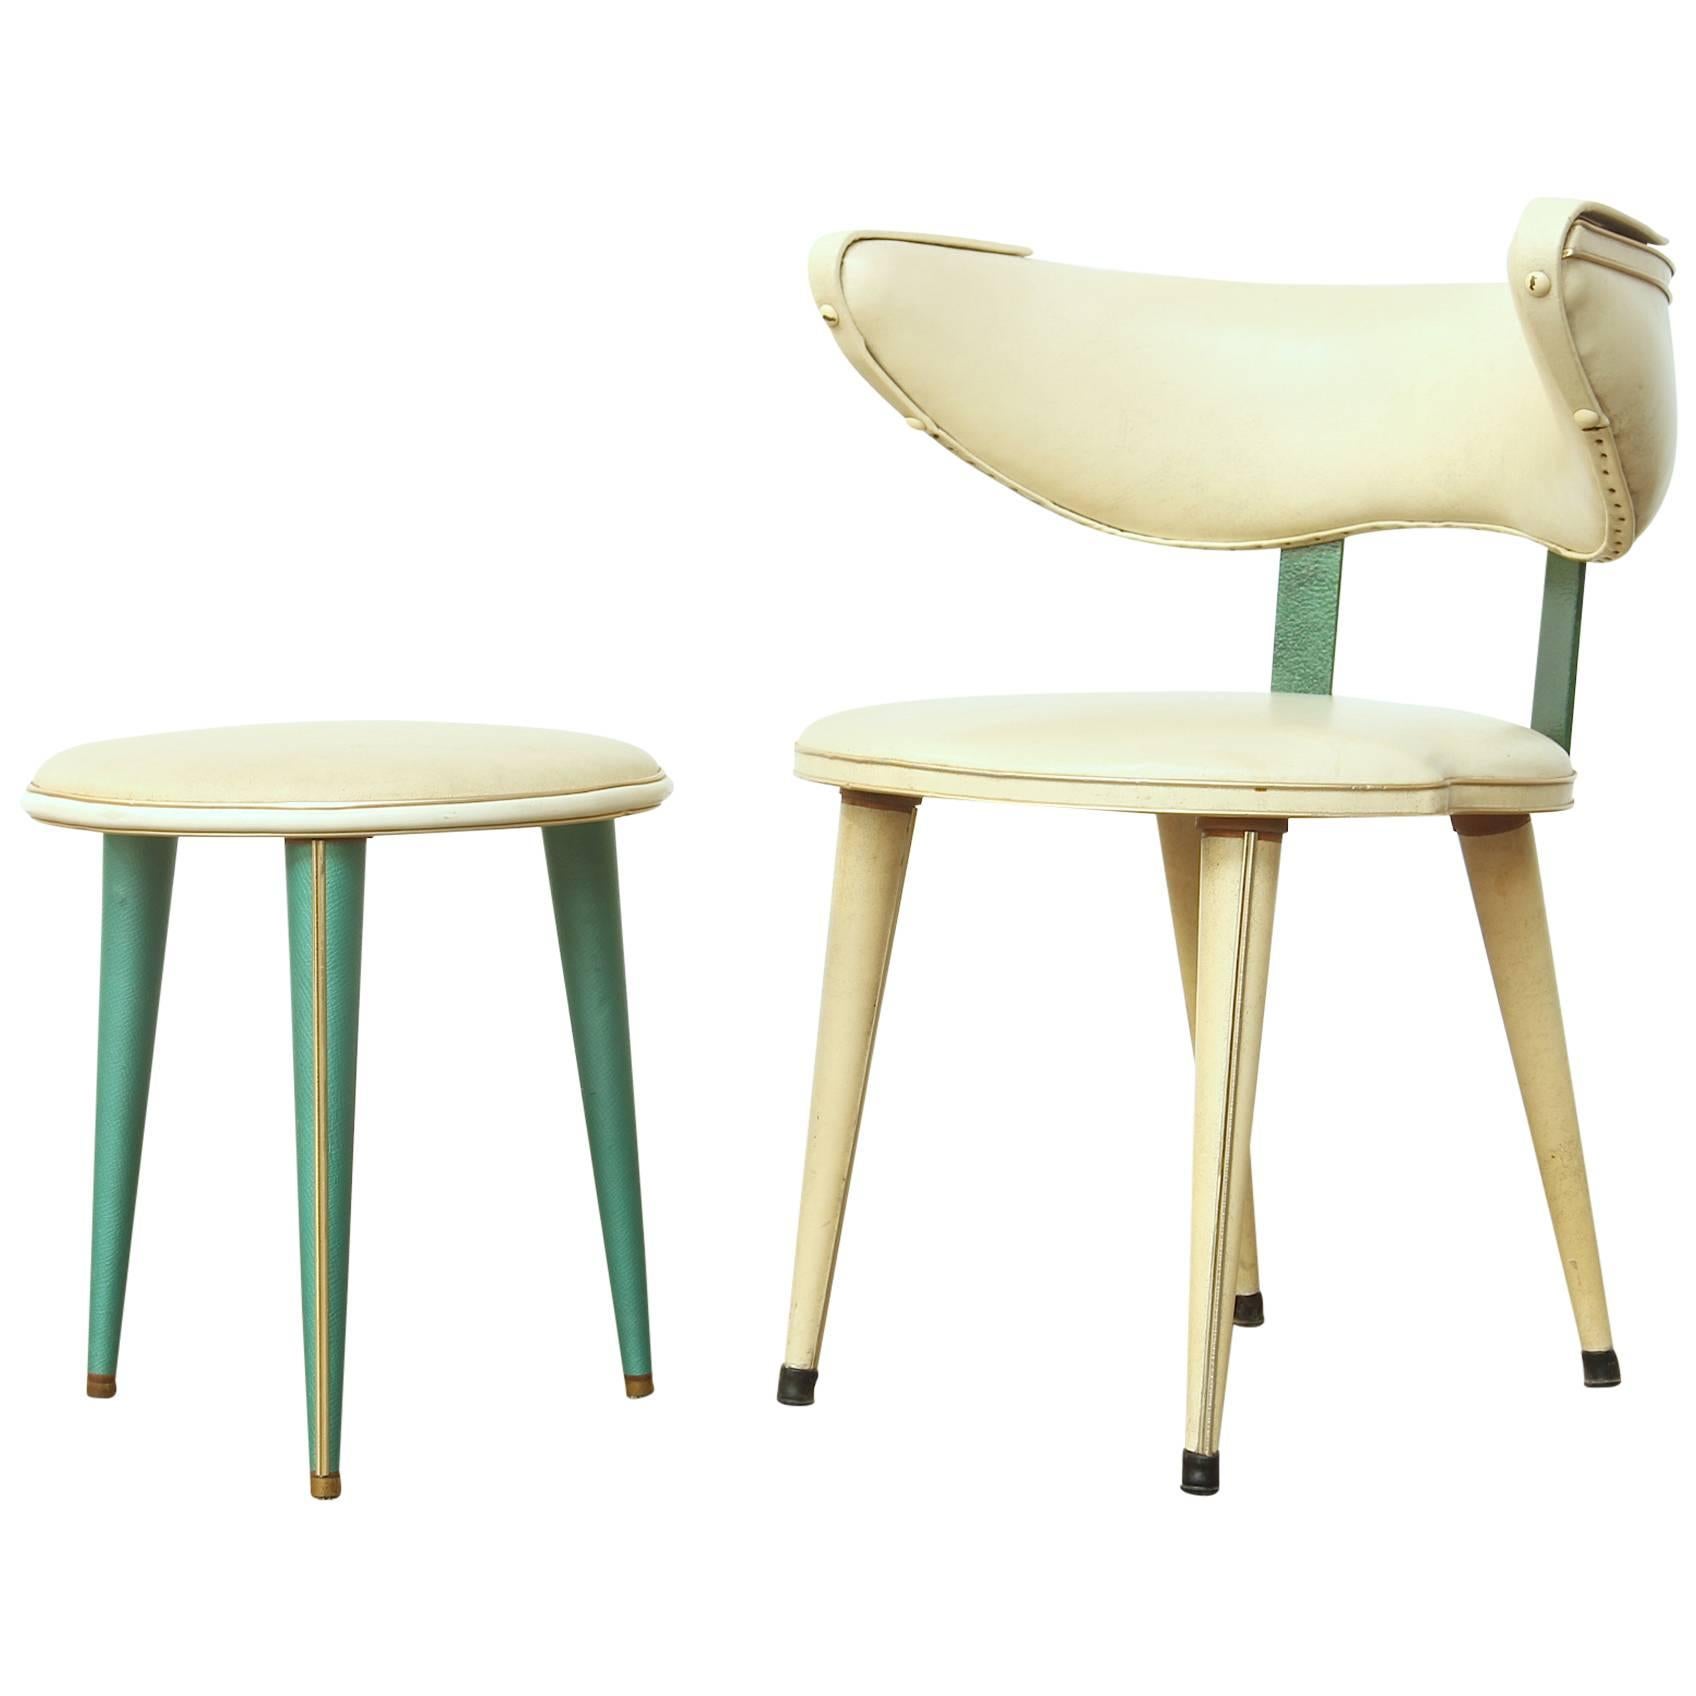 Side Chair and Stool by Umberto Mascagni, Italy